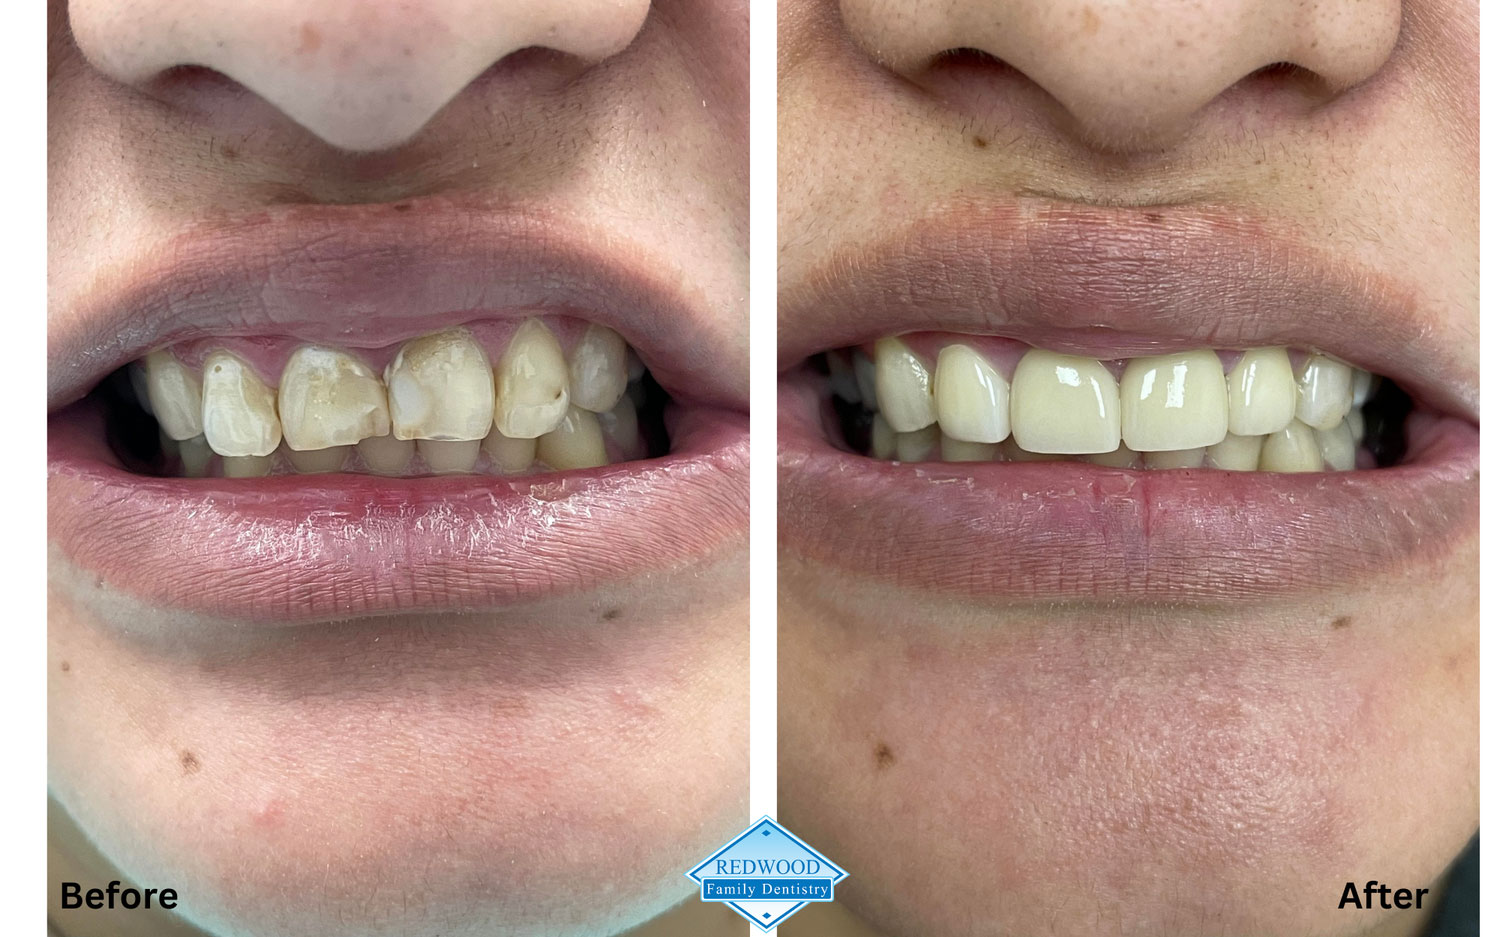 Redwood Family Dentistry patient before & after